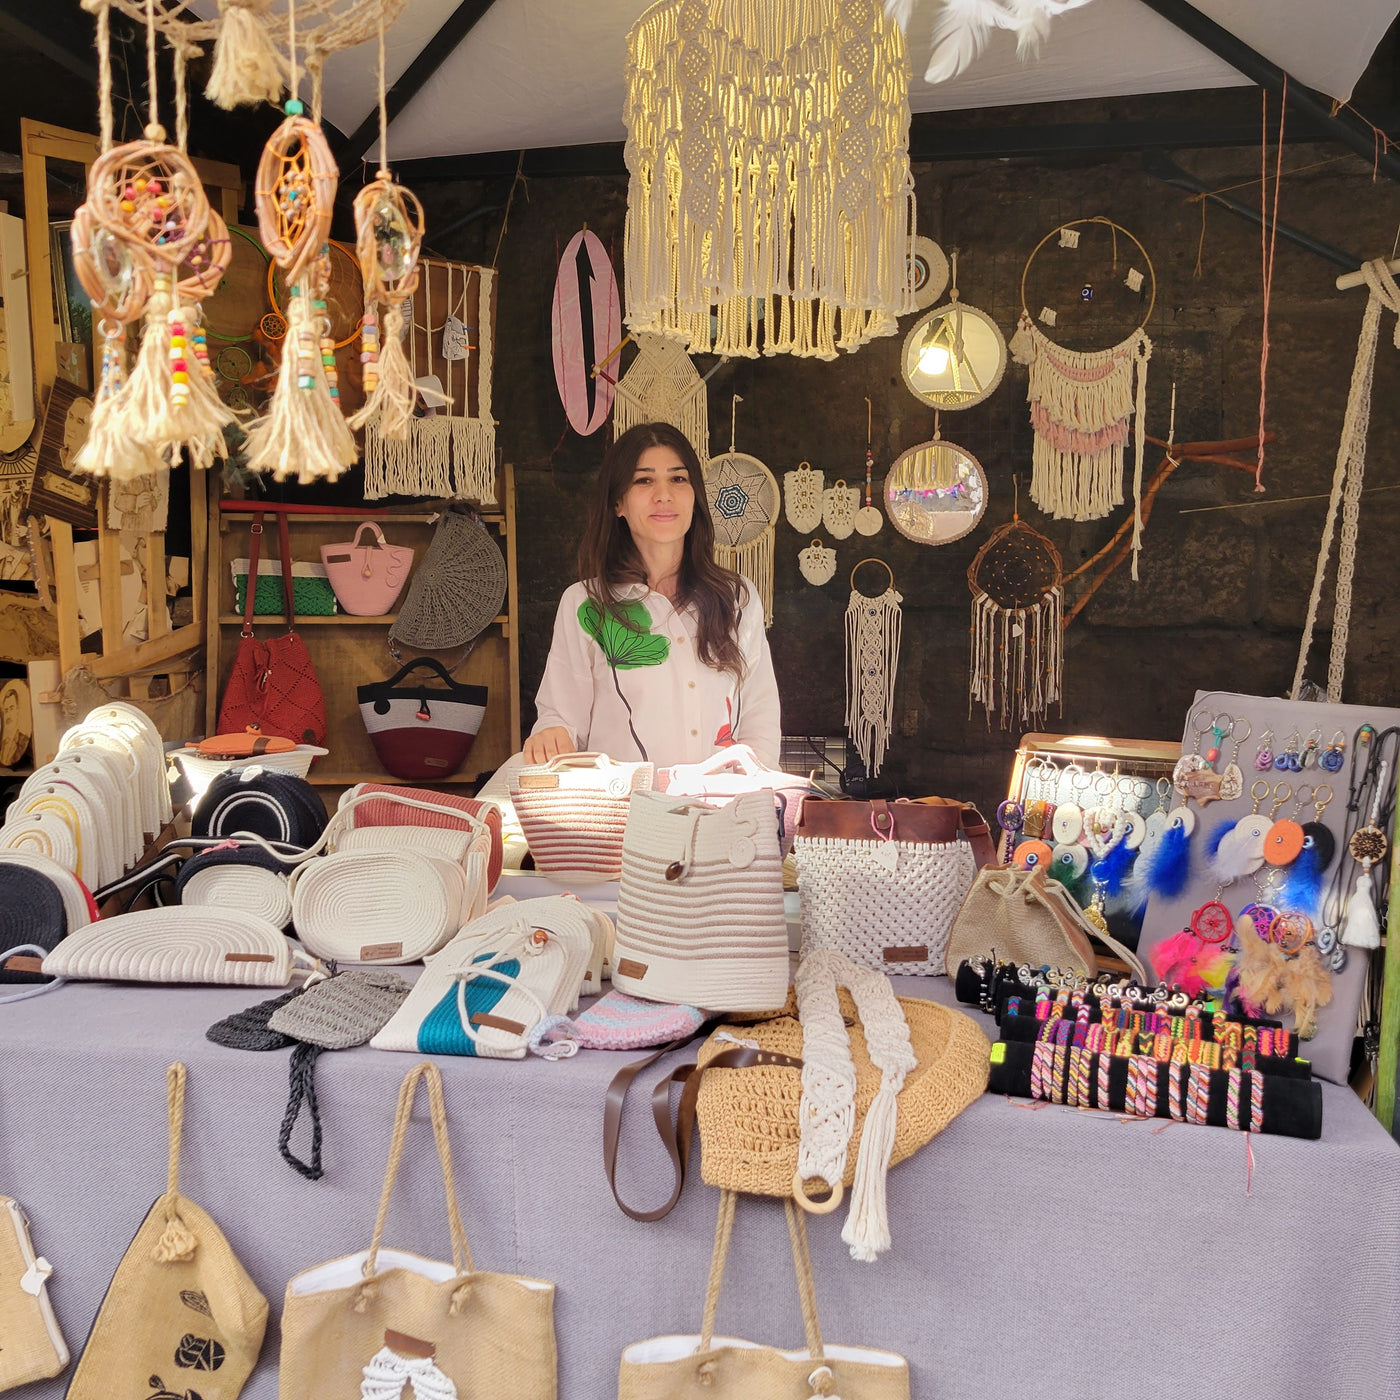 Artist, Elif, in her shop with macrame accessories